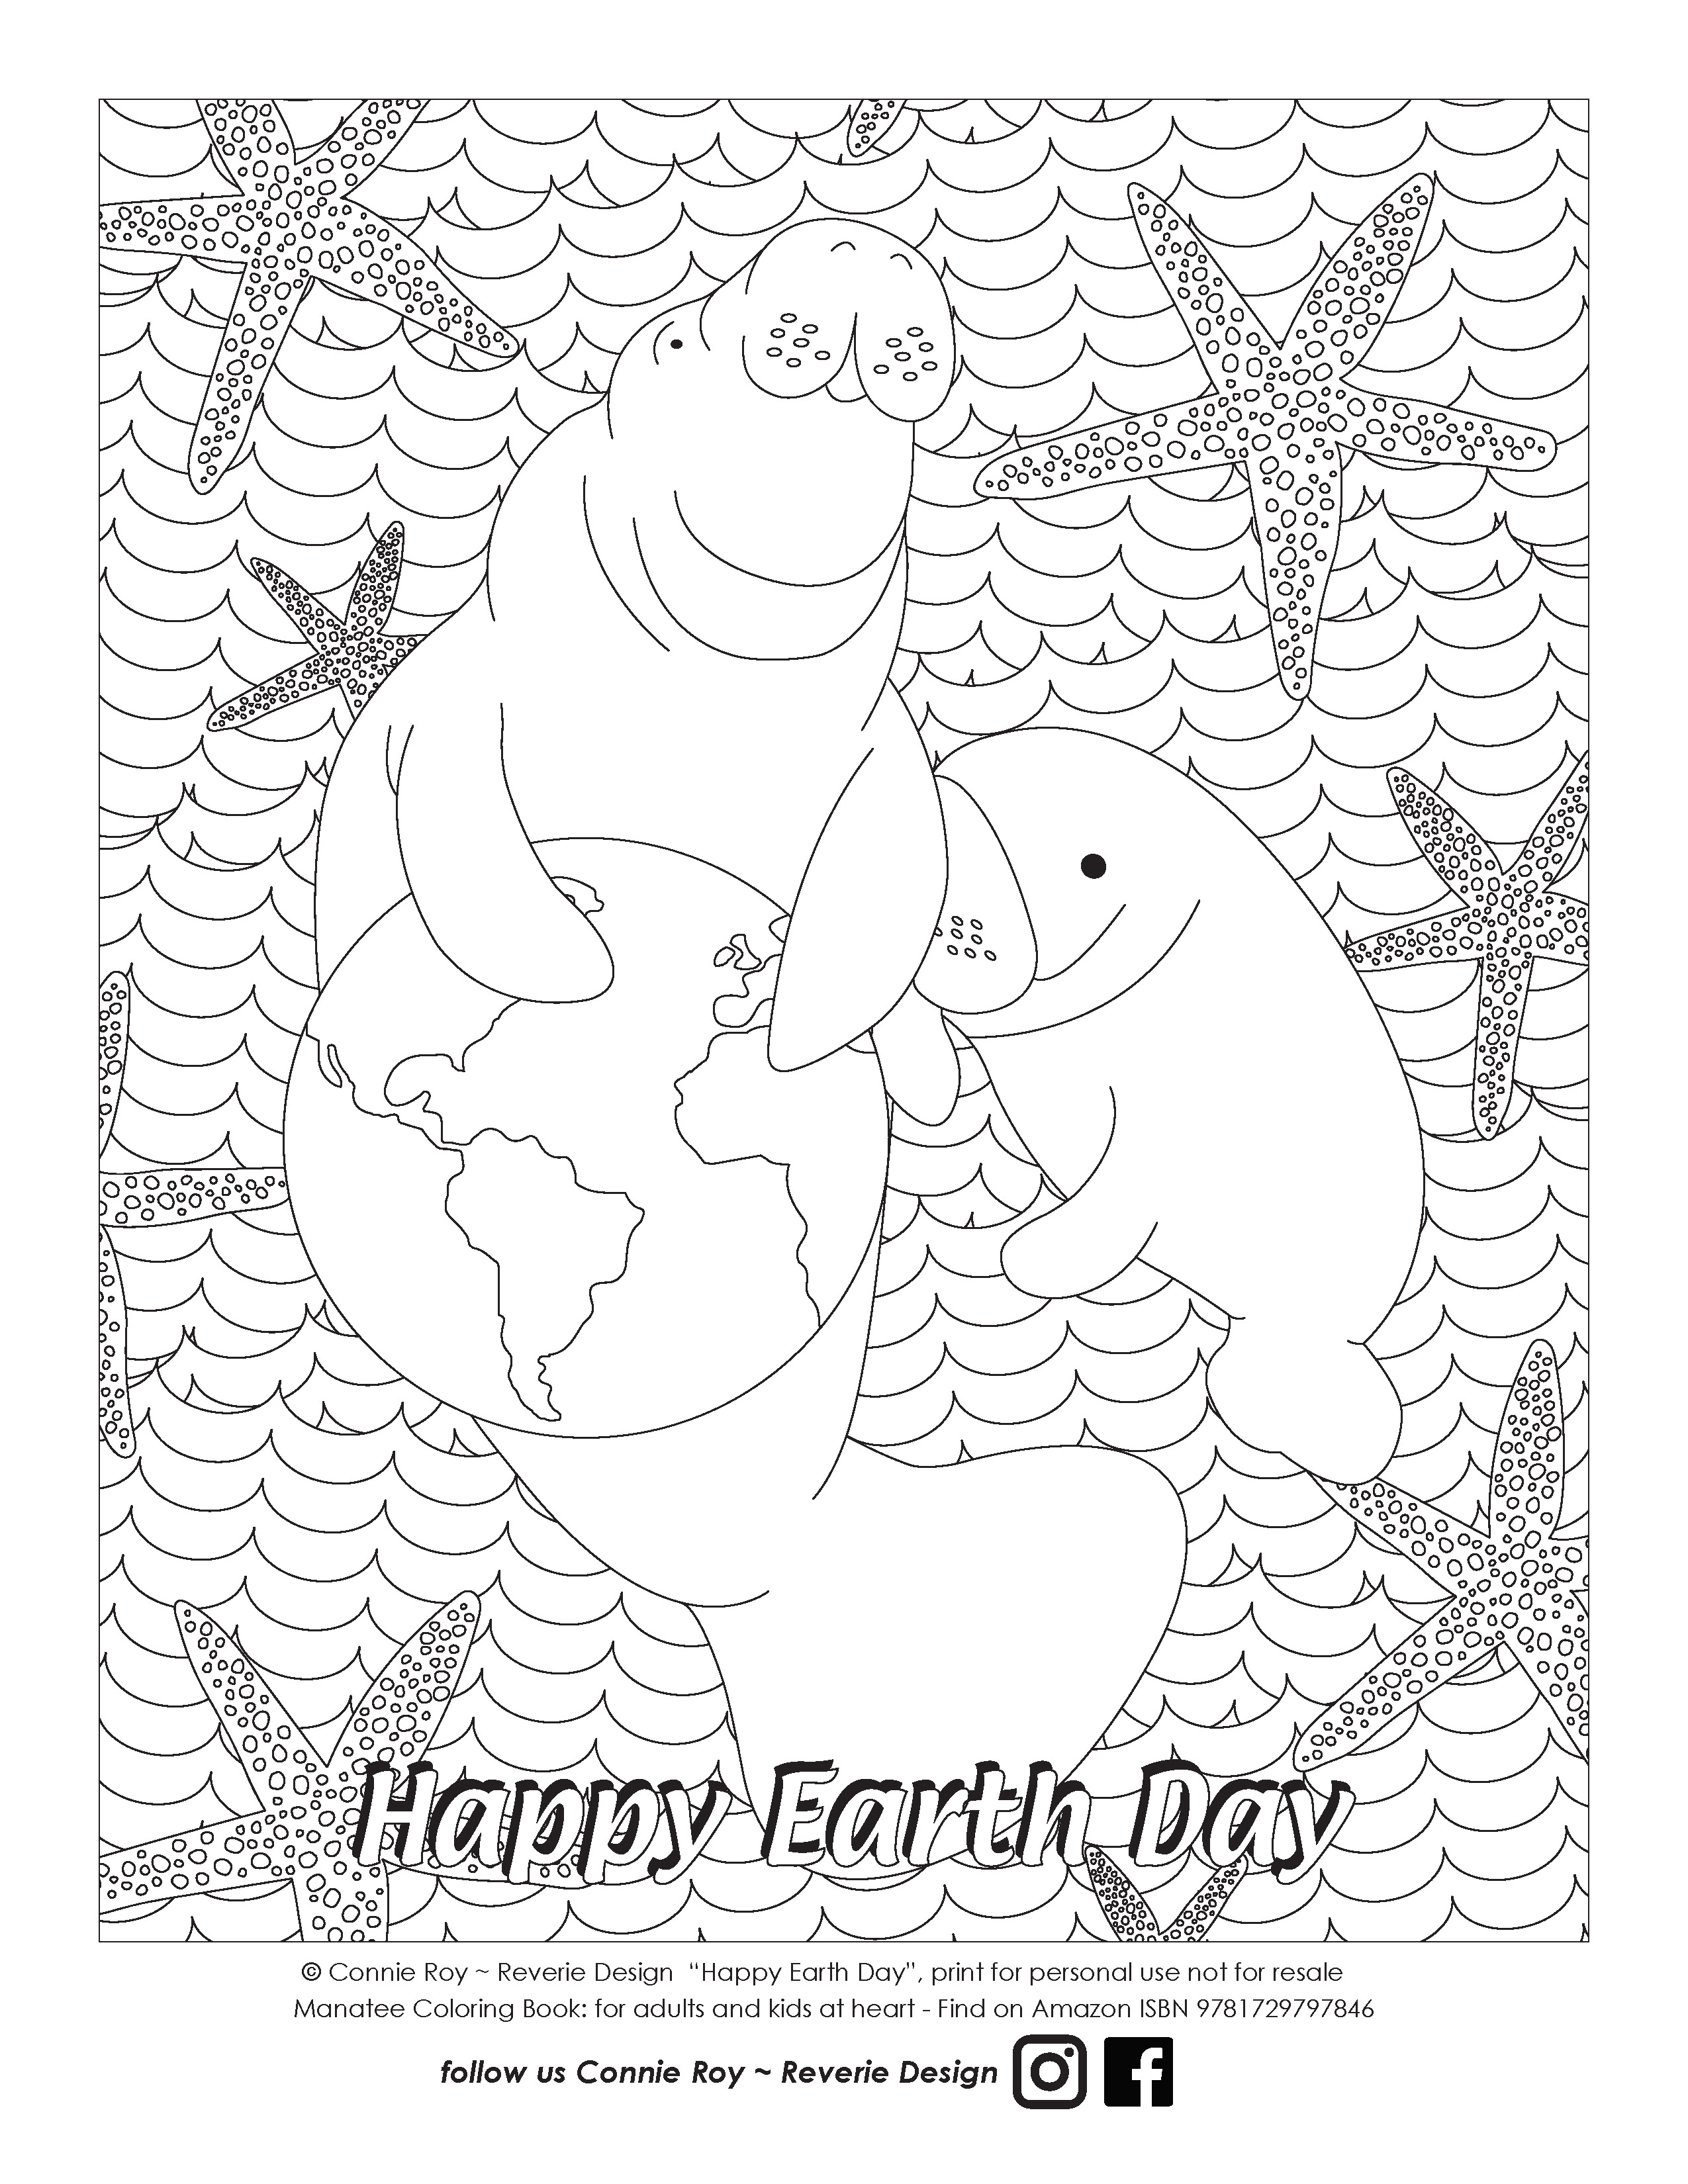 Save the manatee on x today is earthday